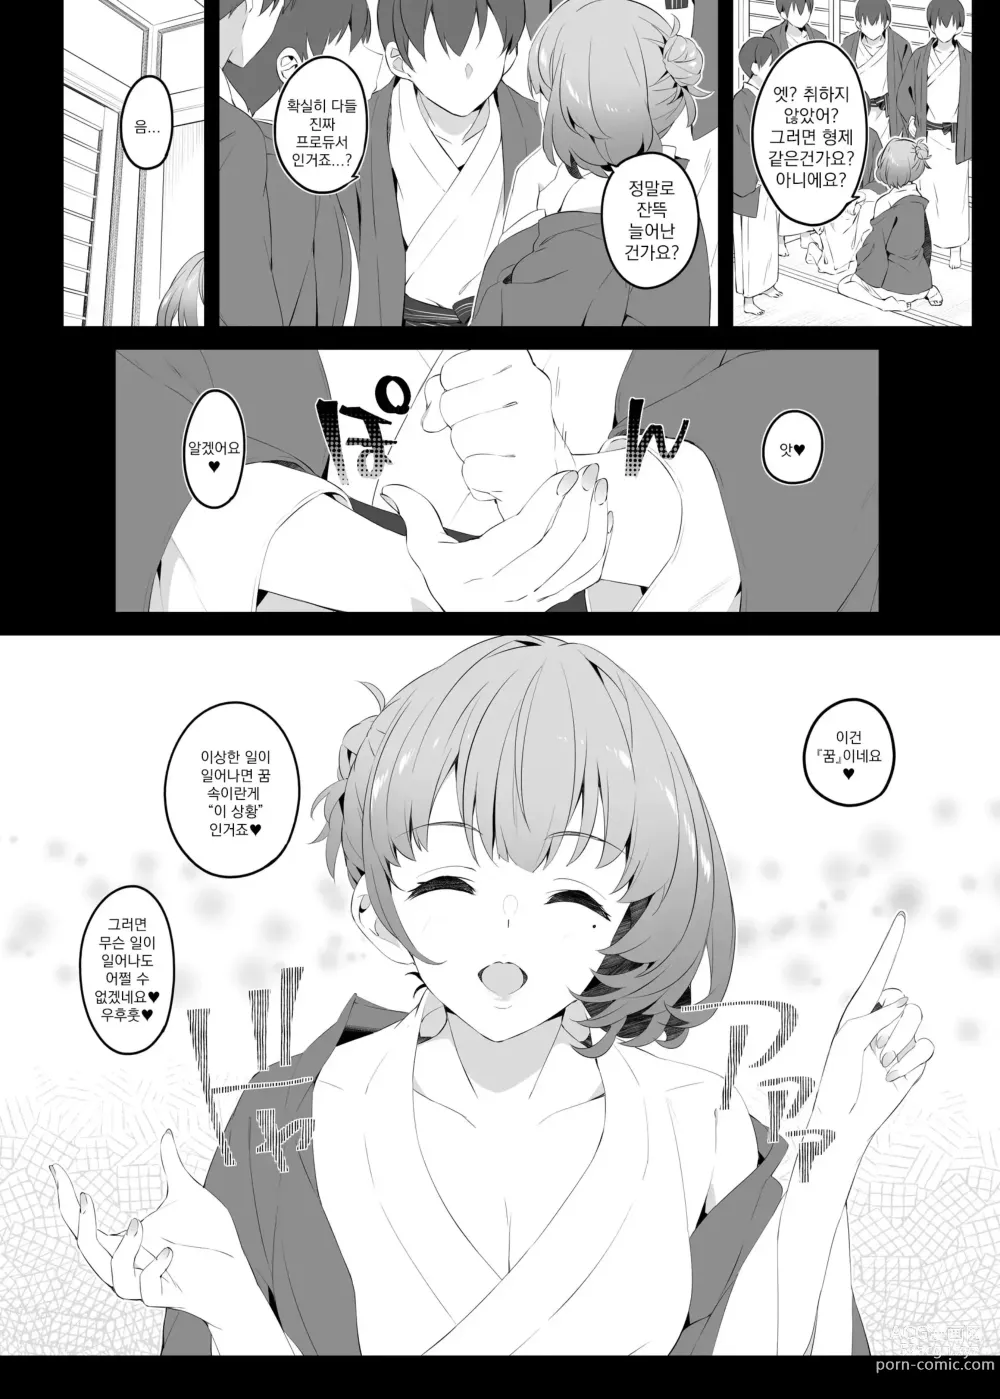 Page 10 of doujinshi Flowers blooming at night and the kings in the dream.